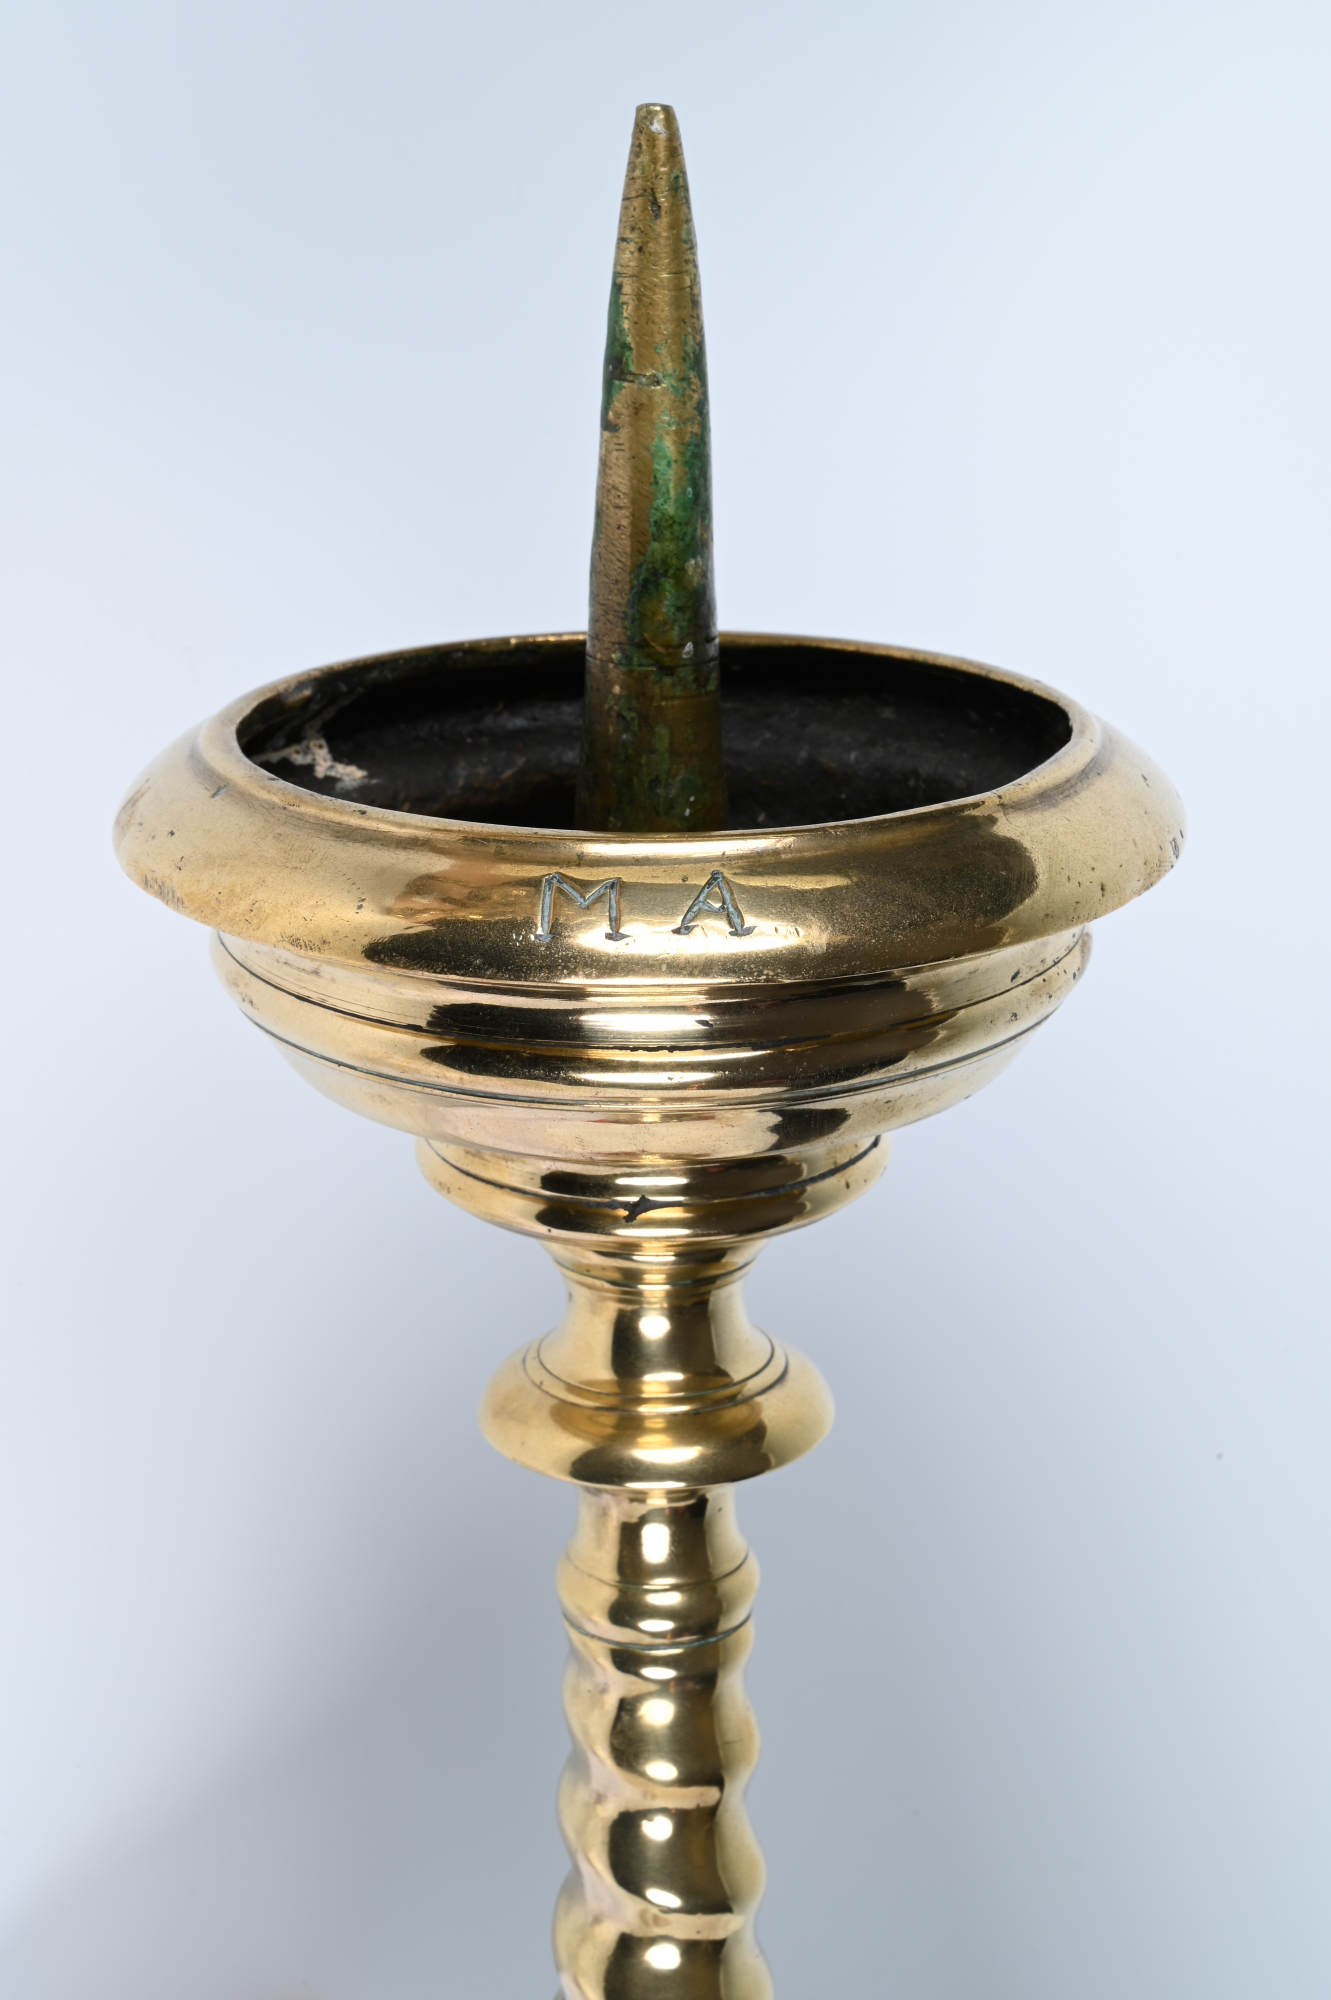 Lot - A collection of brass pricket candlesticks and an alms dish, 16th -  17thC, H 48,5 - 62,5 - ø 45,5 cm